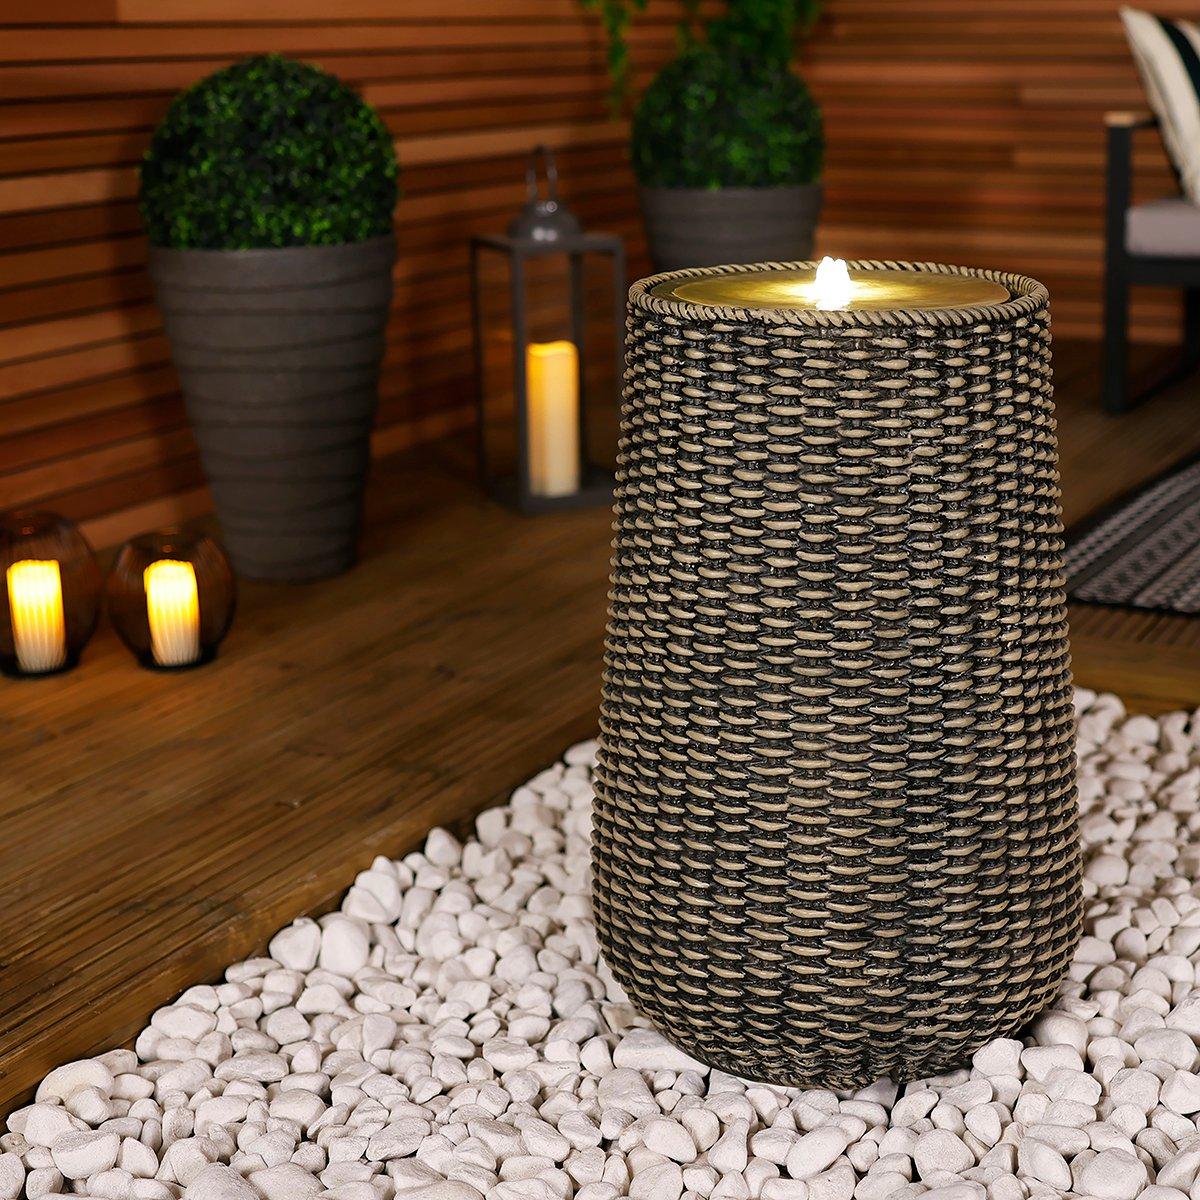 Rattan Effect Water Feature with LED light